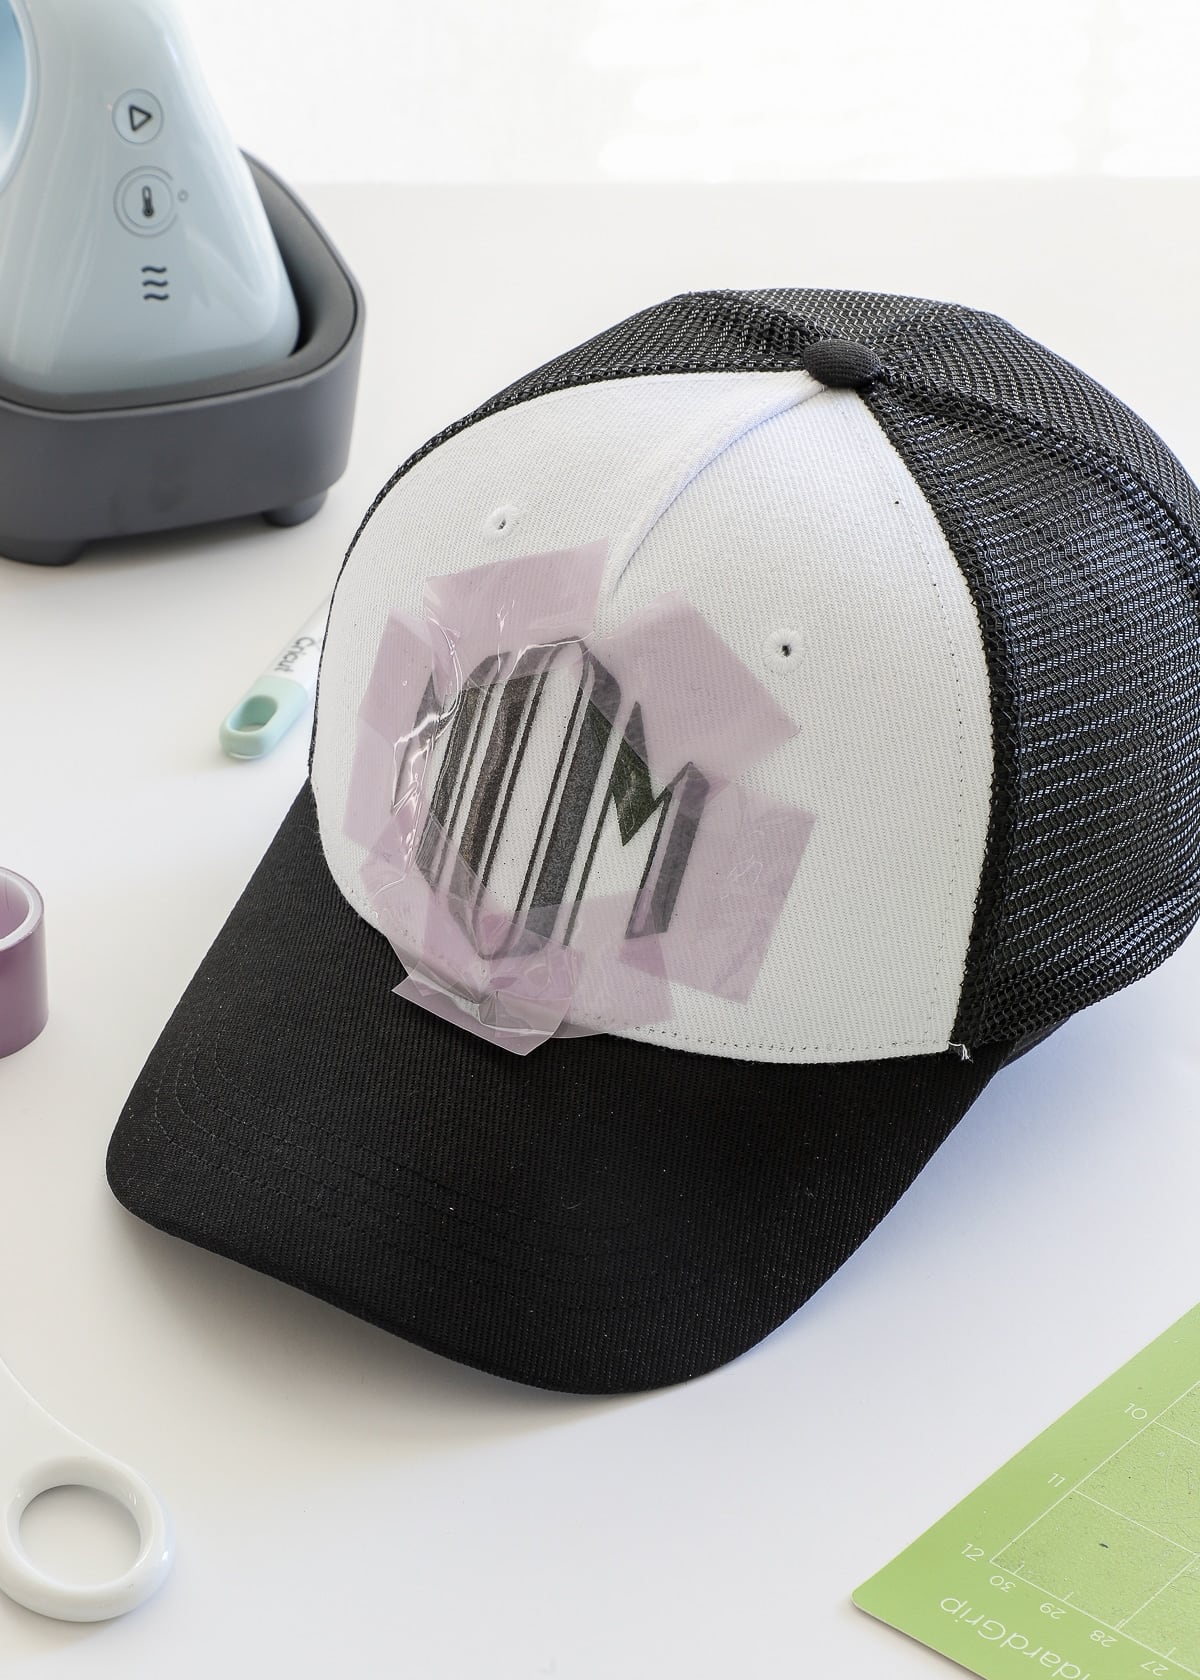 Cricut Hat Press Review - Hats Off To You